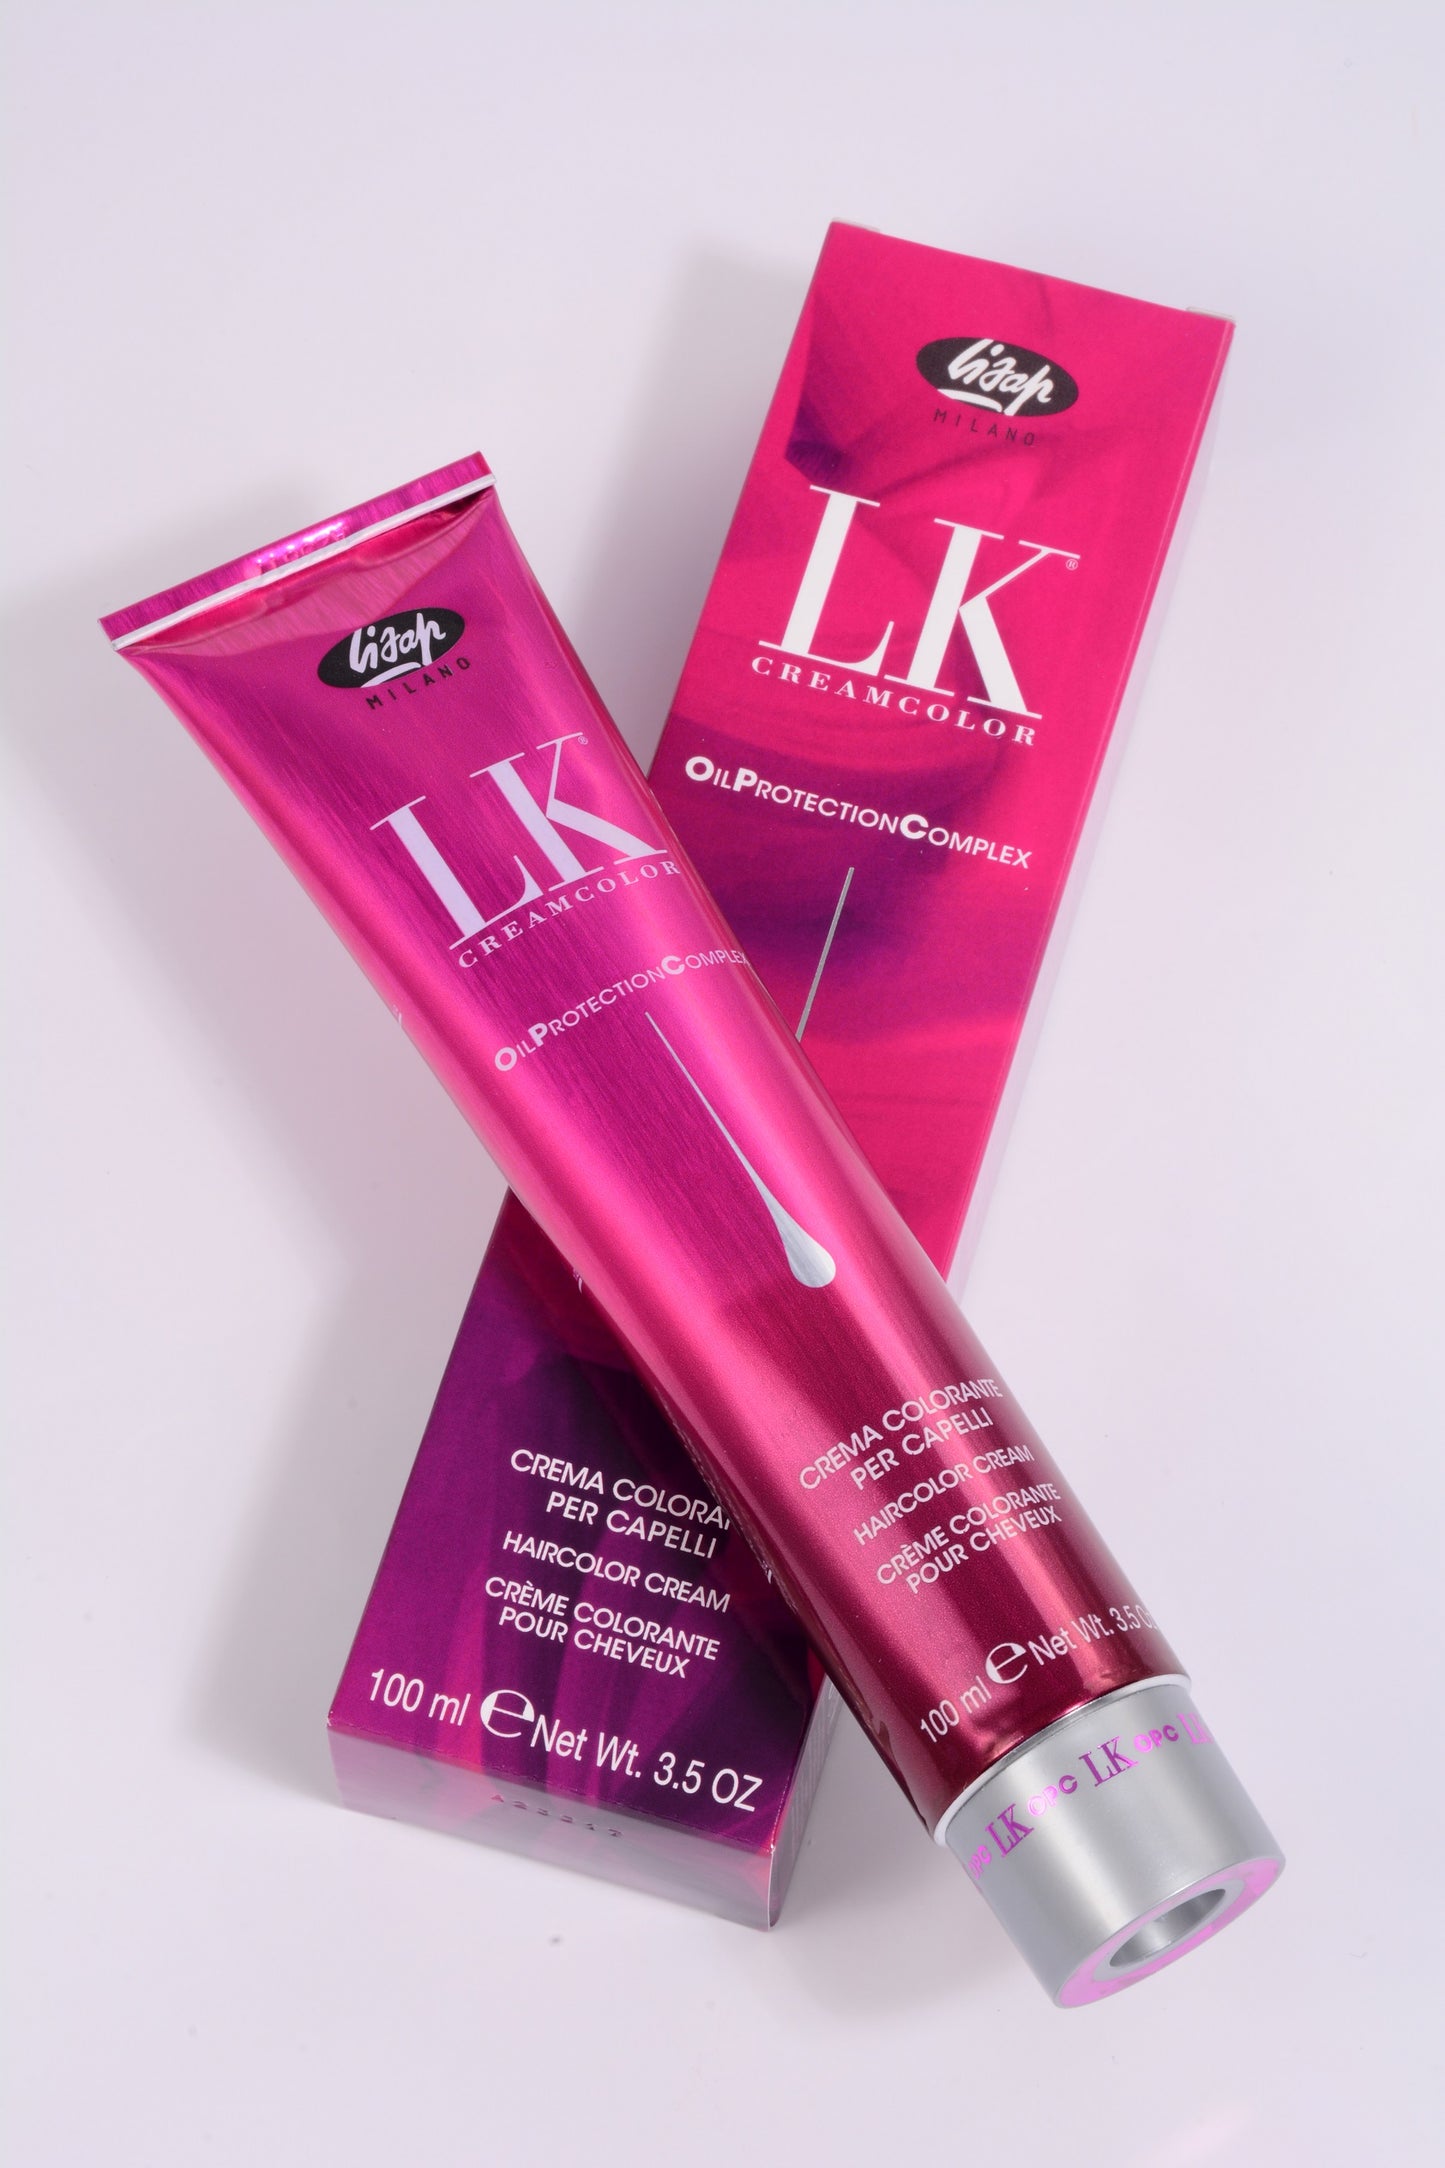 LK Creamcolor 2/0 Oil Protection Complex